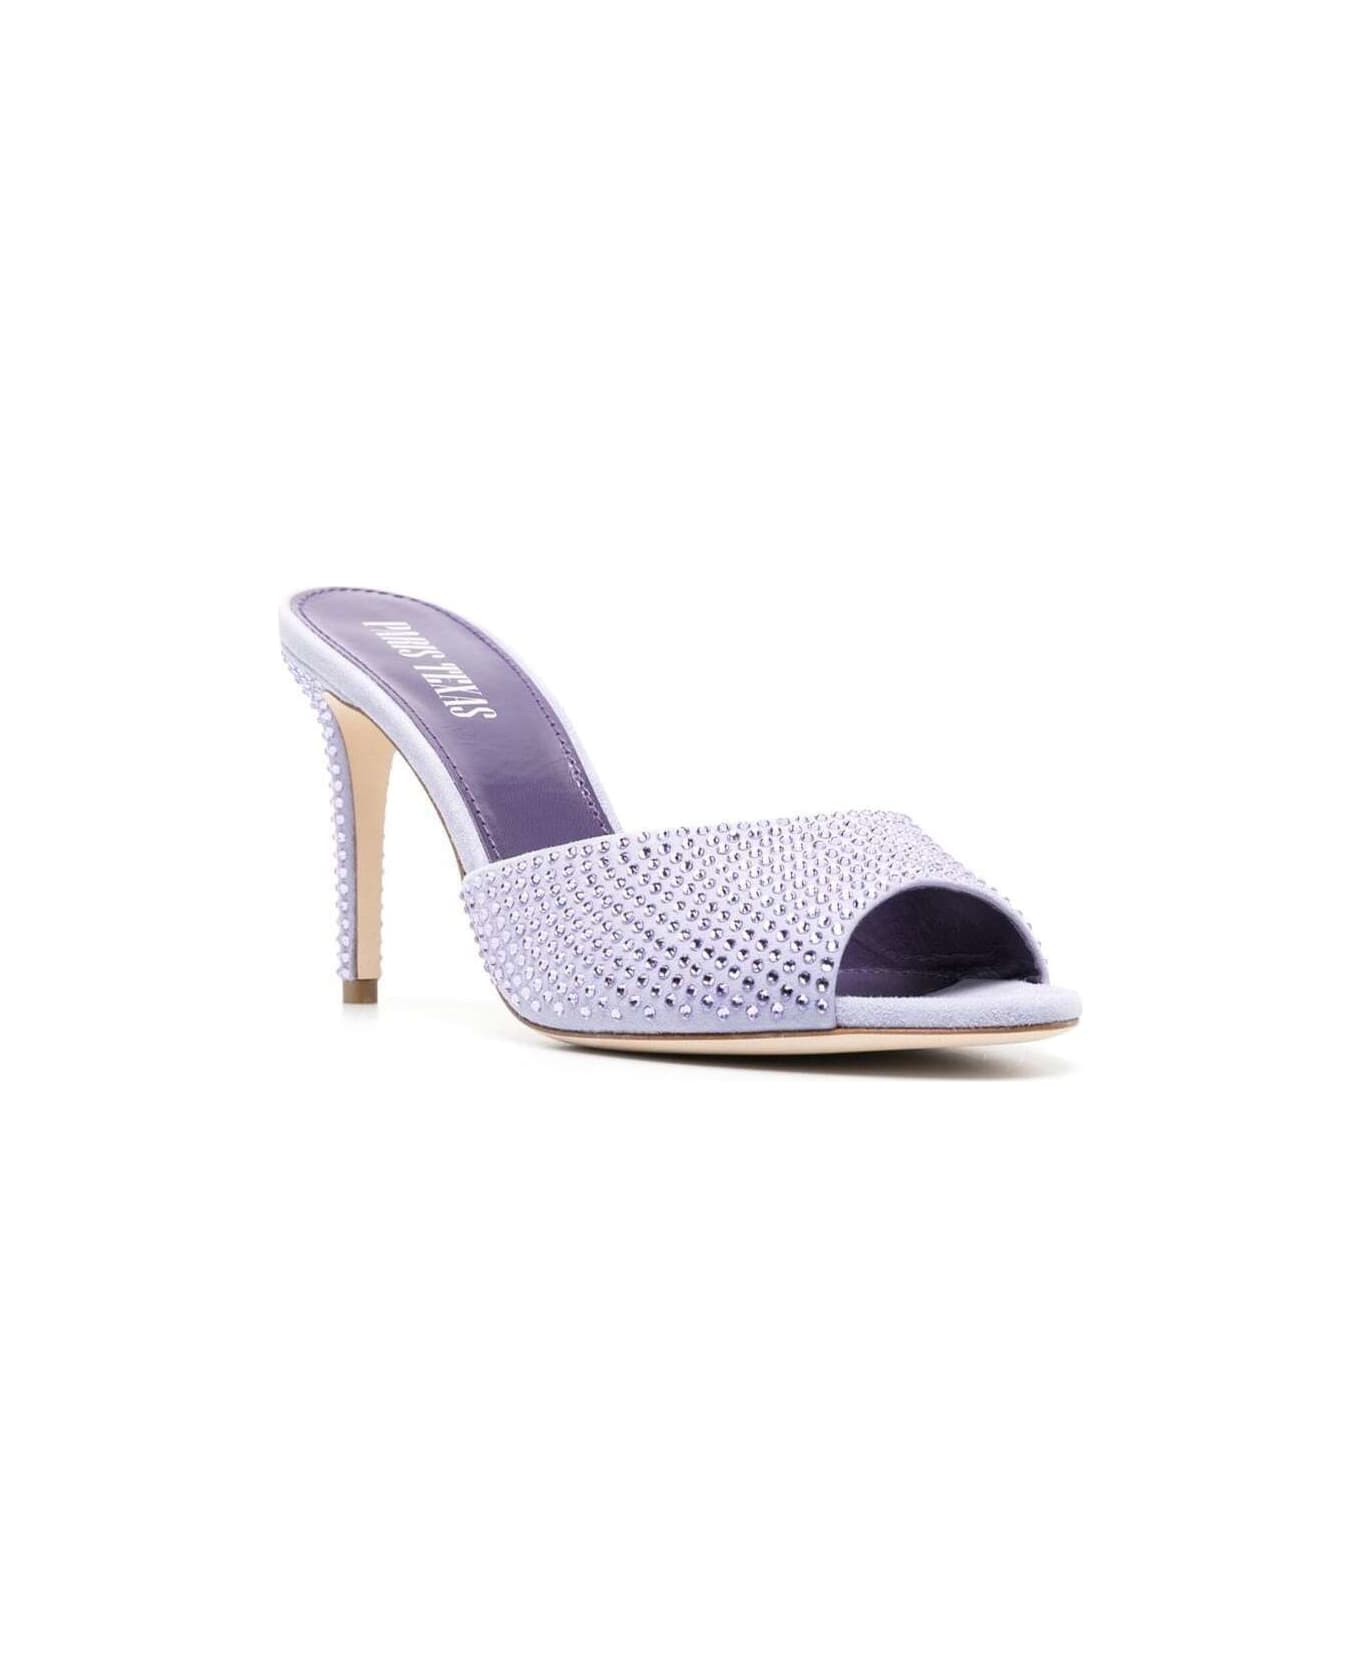 Paris Texas 'holly' Lilac Mules With Tonal Rhinestone Embellishment In Leather Woman - Violet サンダル